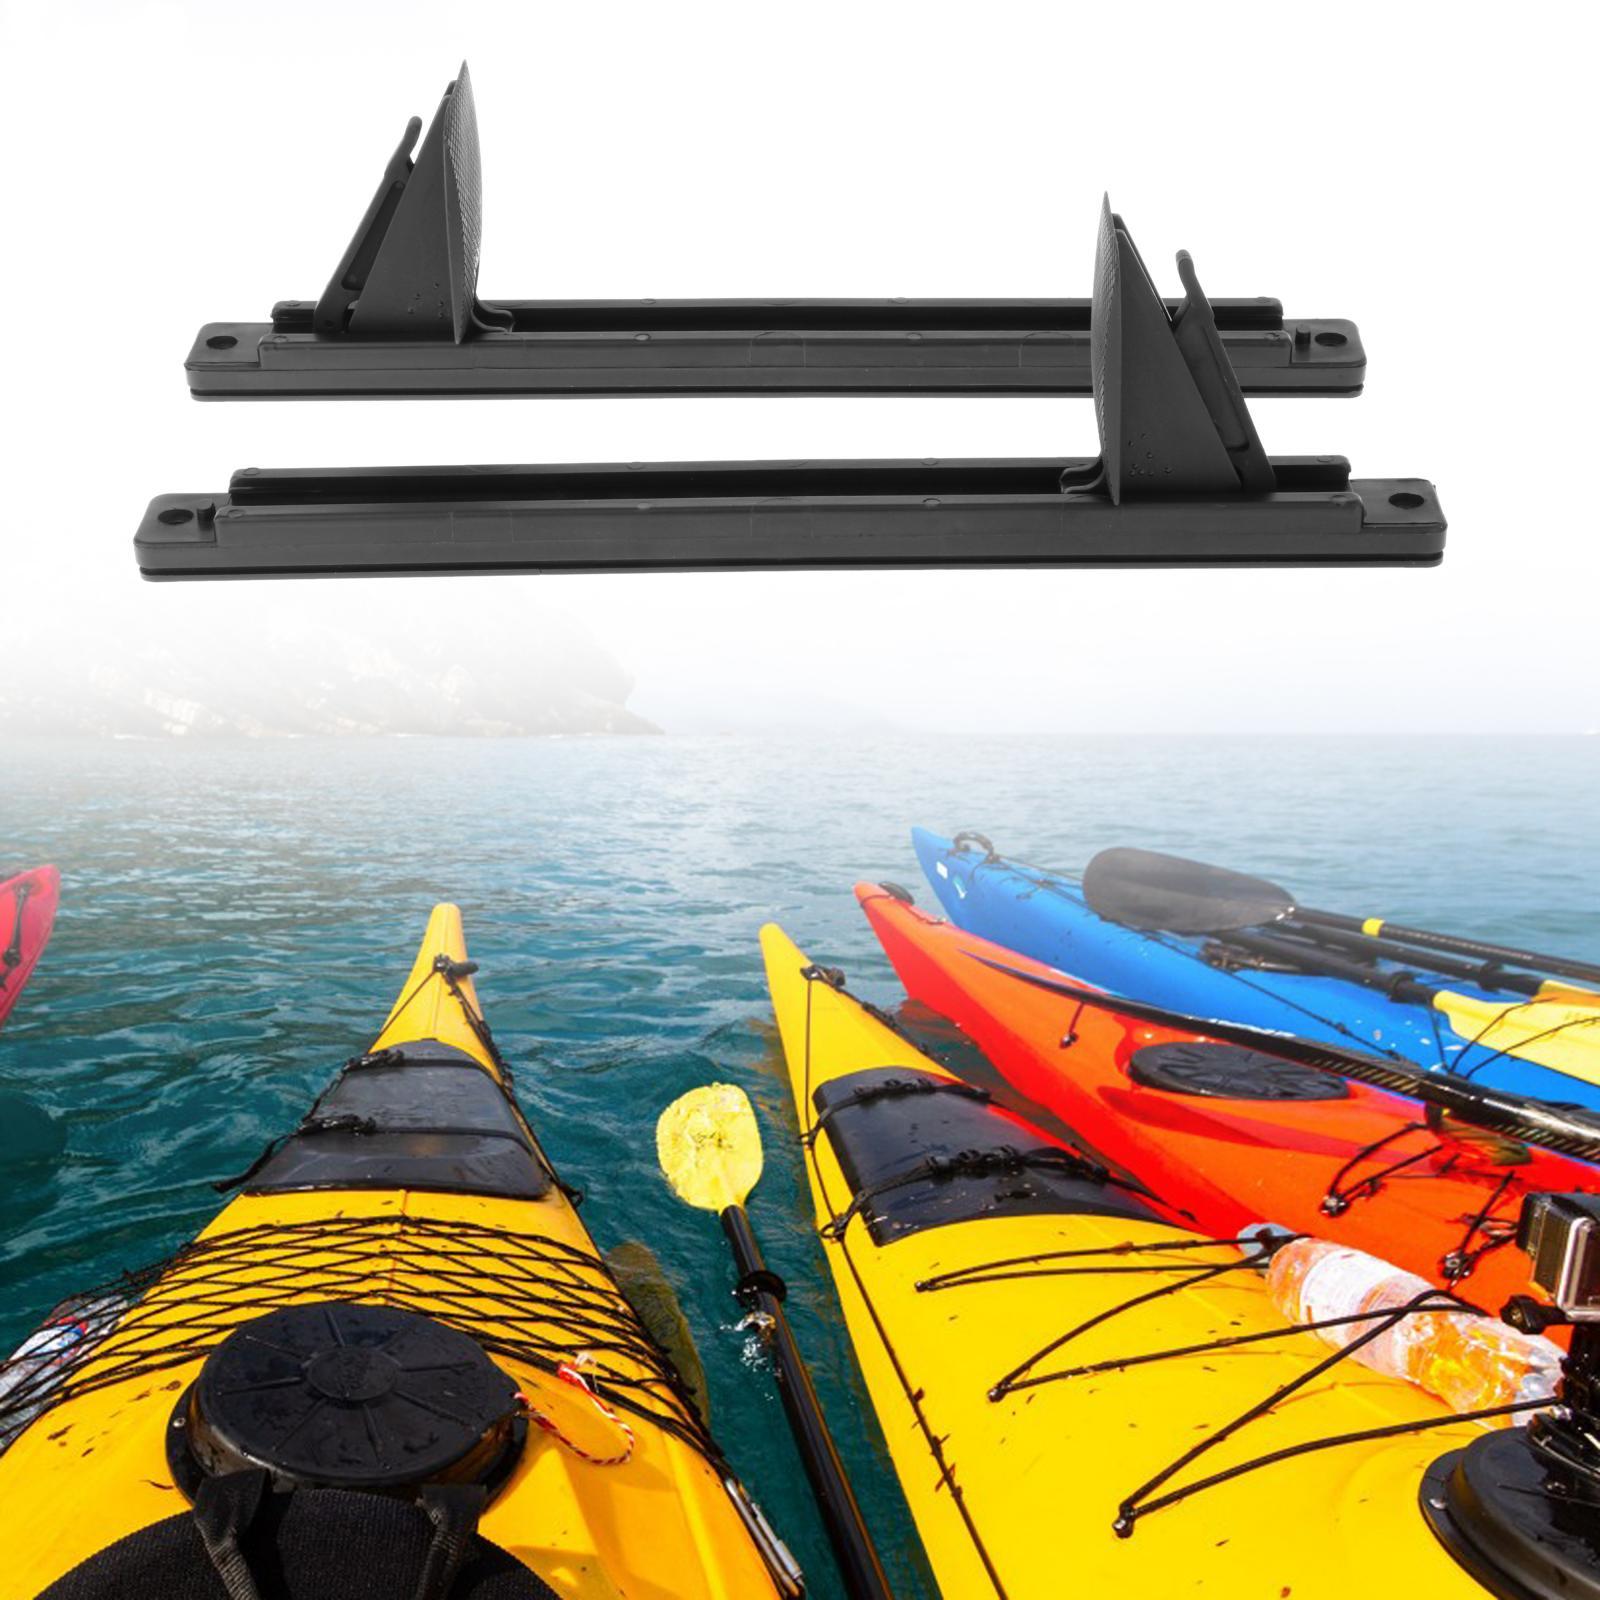 Kayak Foot Pegs with Lock Replacement Parts Black Finish 15 Inches Universal Set of 2 Foot Brace Foot Pedals Footrest